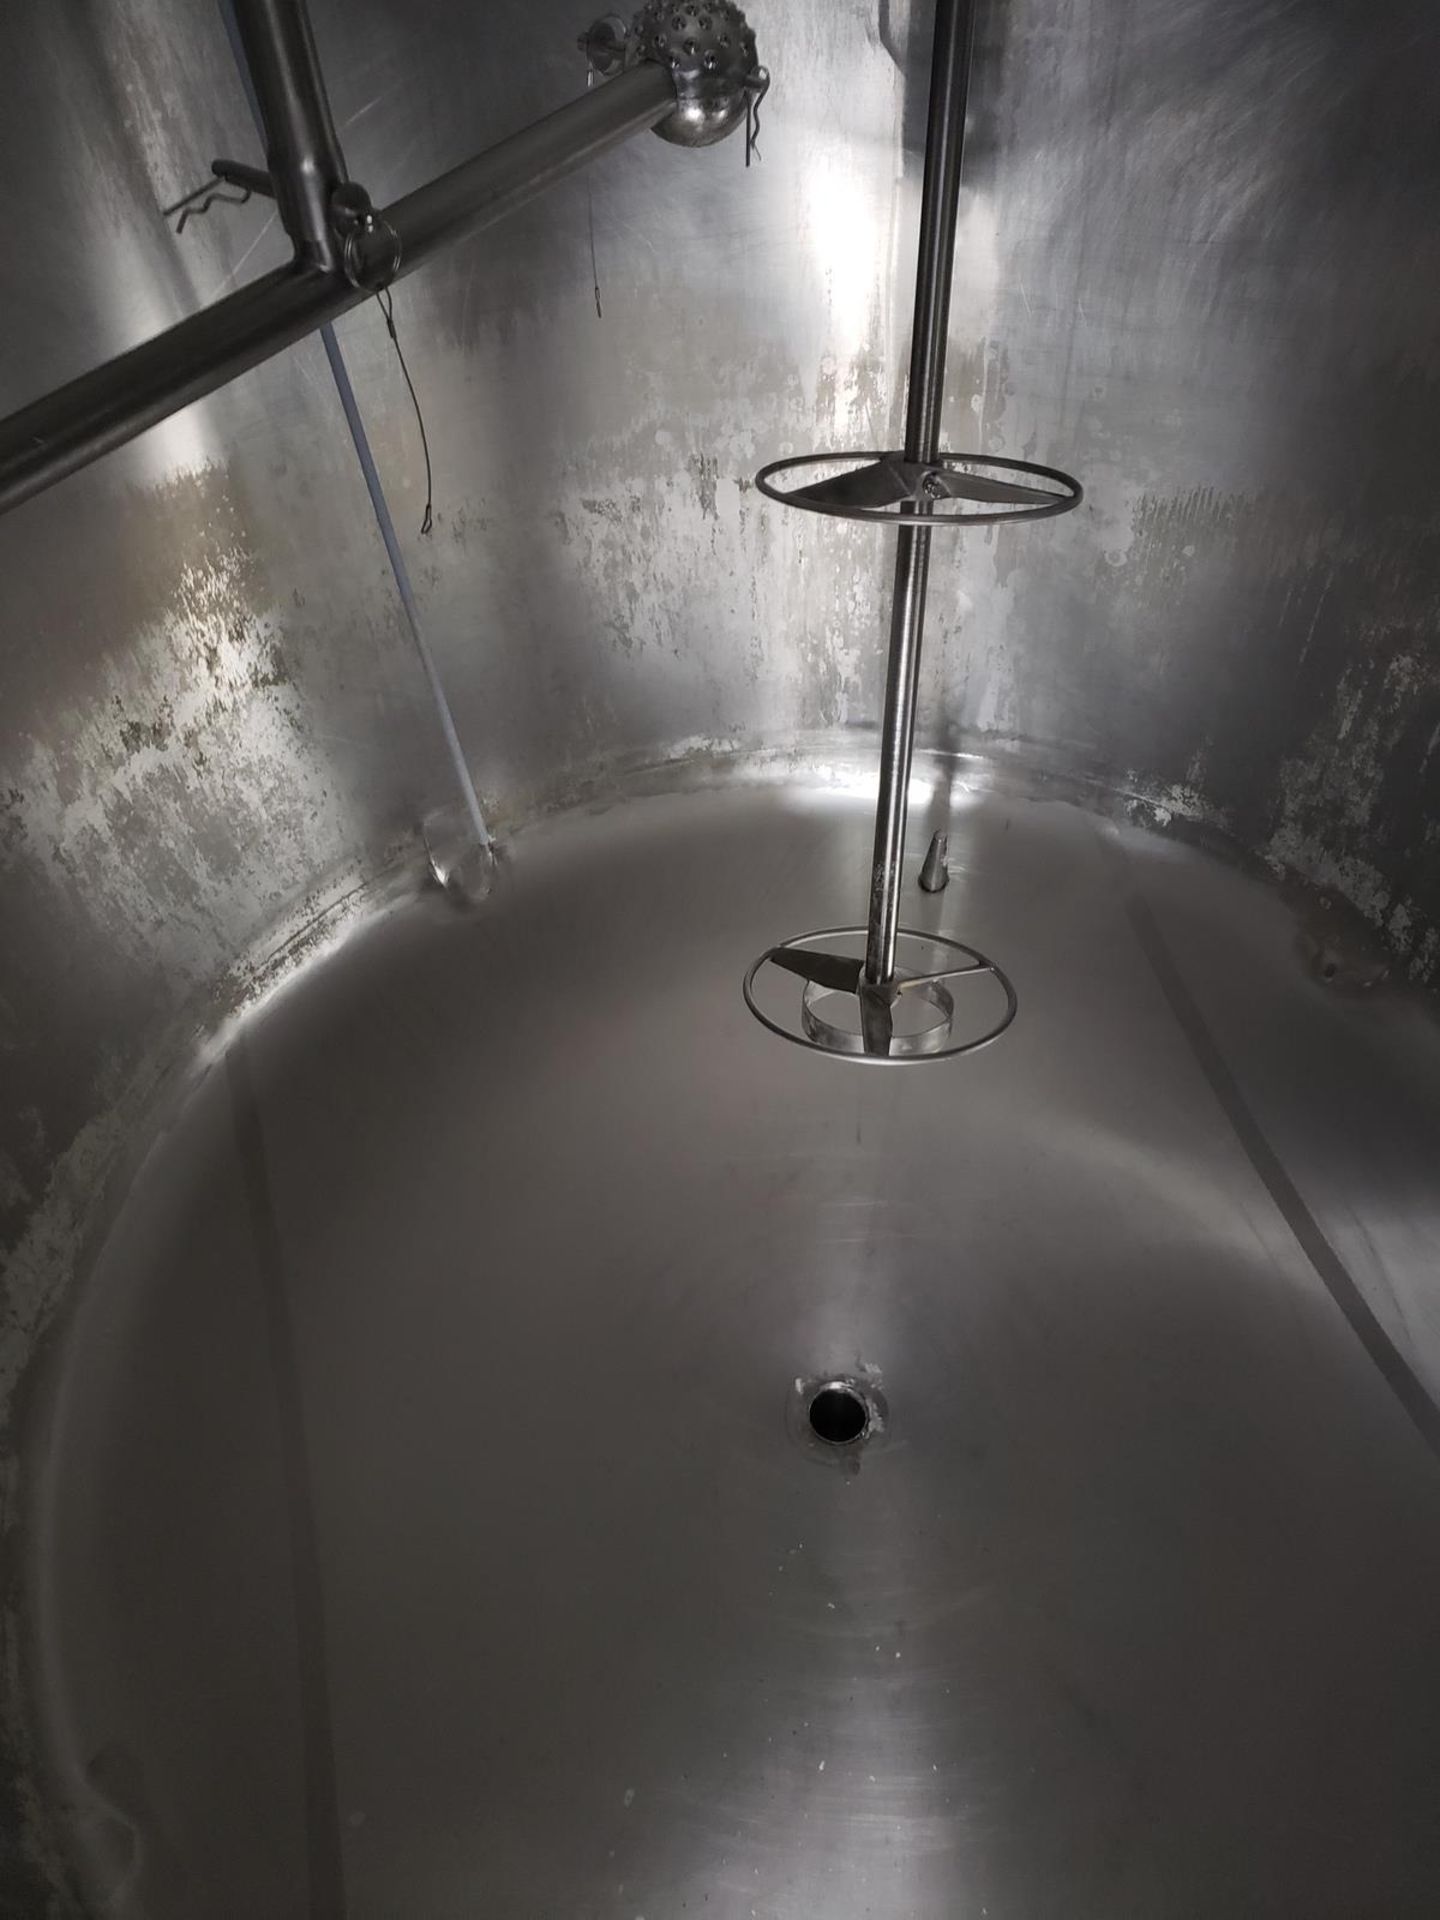 500 Gallon Stainless Steel Top Agitated Blending/Fermentation Tank | Rig Fee $850 - Image 4 of 4